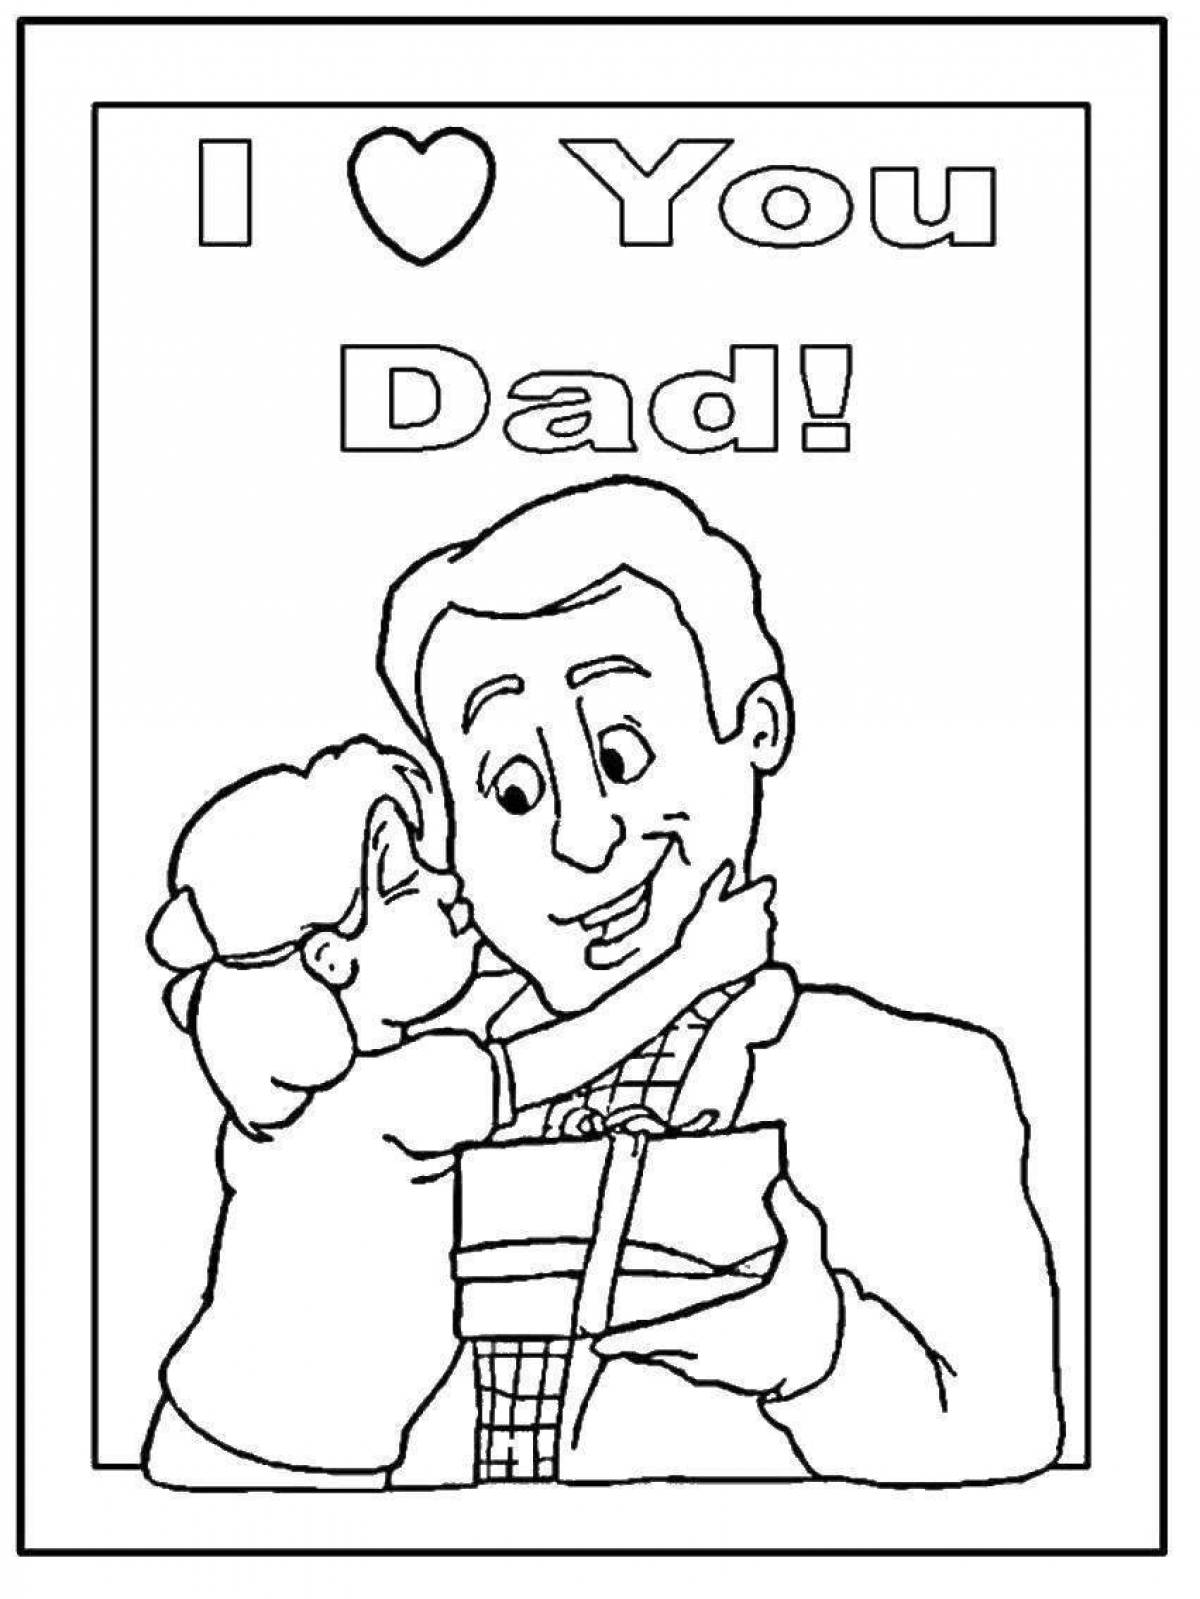 A fun gift for dad on February 23